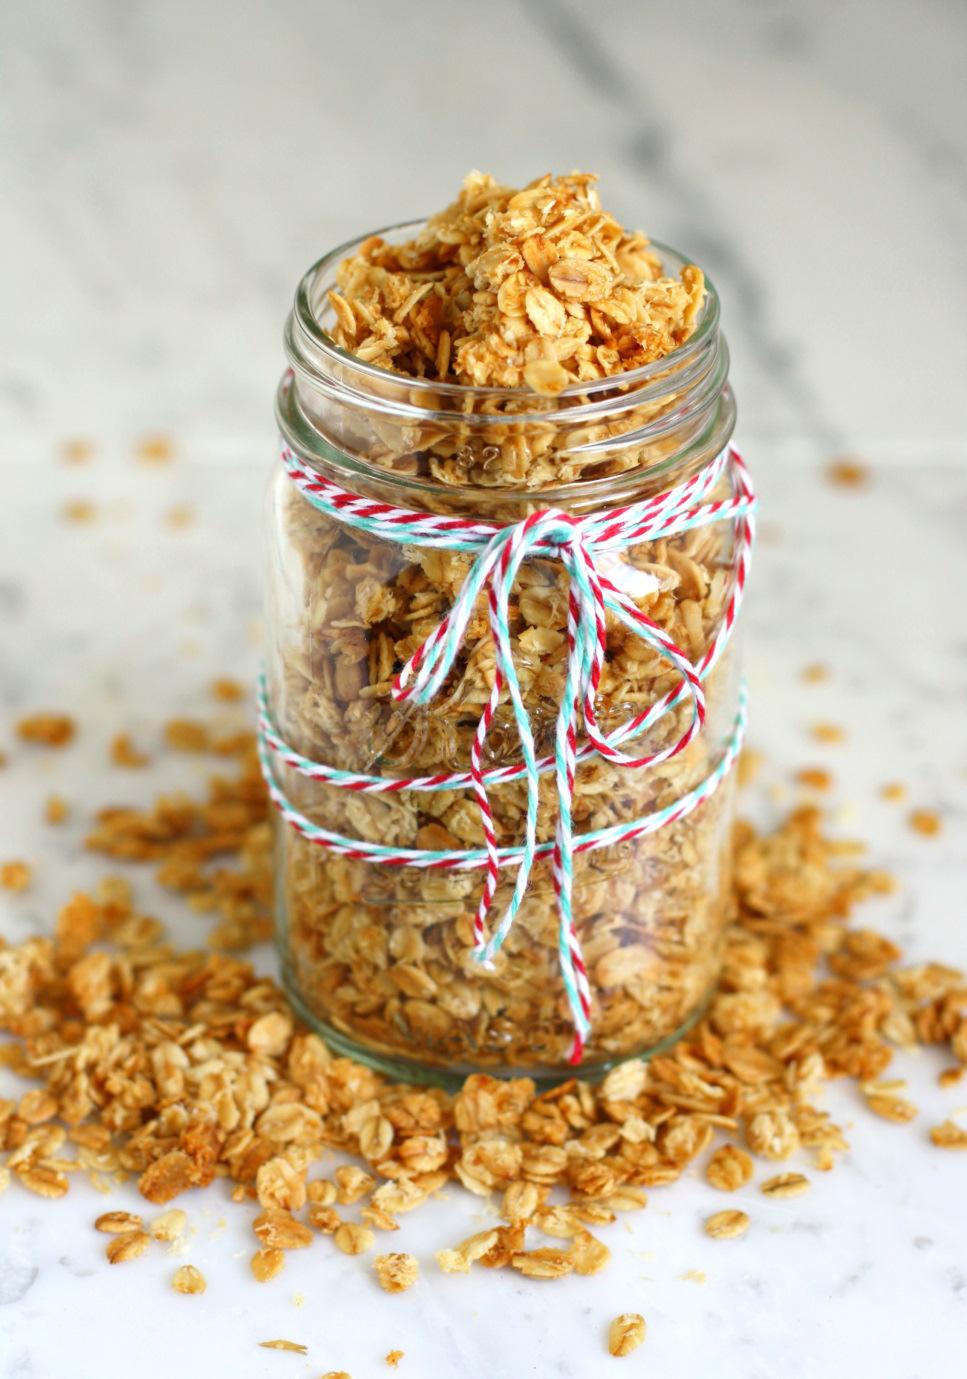 Buttery Coconut Granola 3 cups gluten free whole oats ¾ cup unsweetened coconut flakes ½ teaspoon sea salt ⅓ cup vegan buttery spread ⅓ cup honey or maple syrup 1 teaspoon vanilla extract 1.